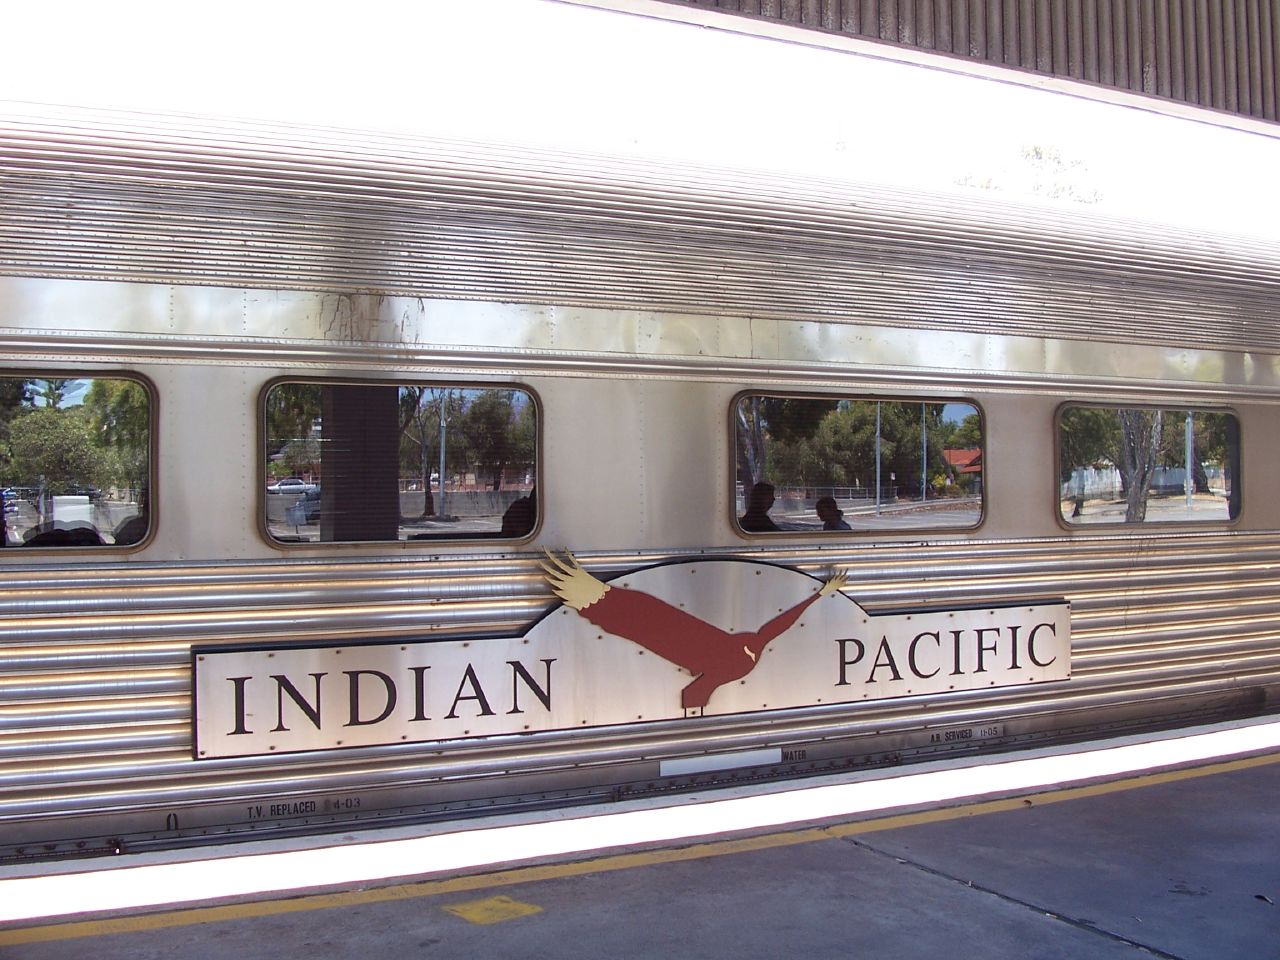 Indian - Pacific 2